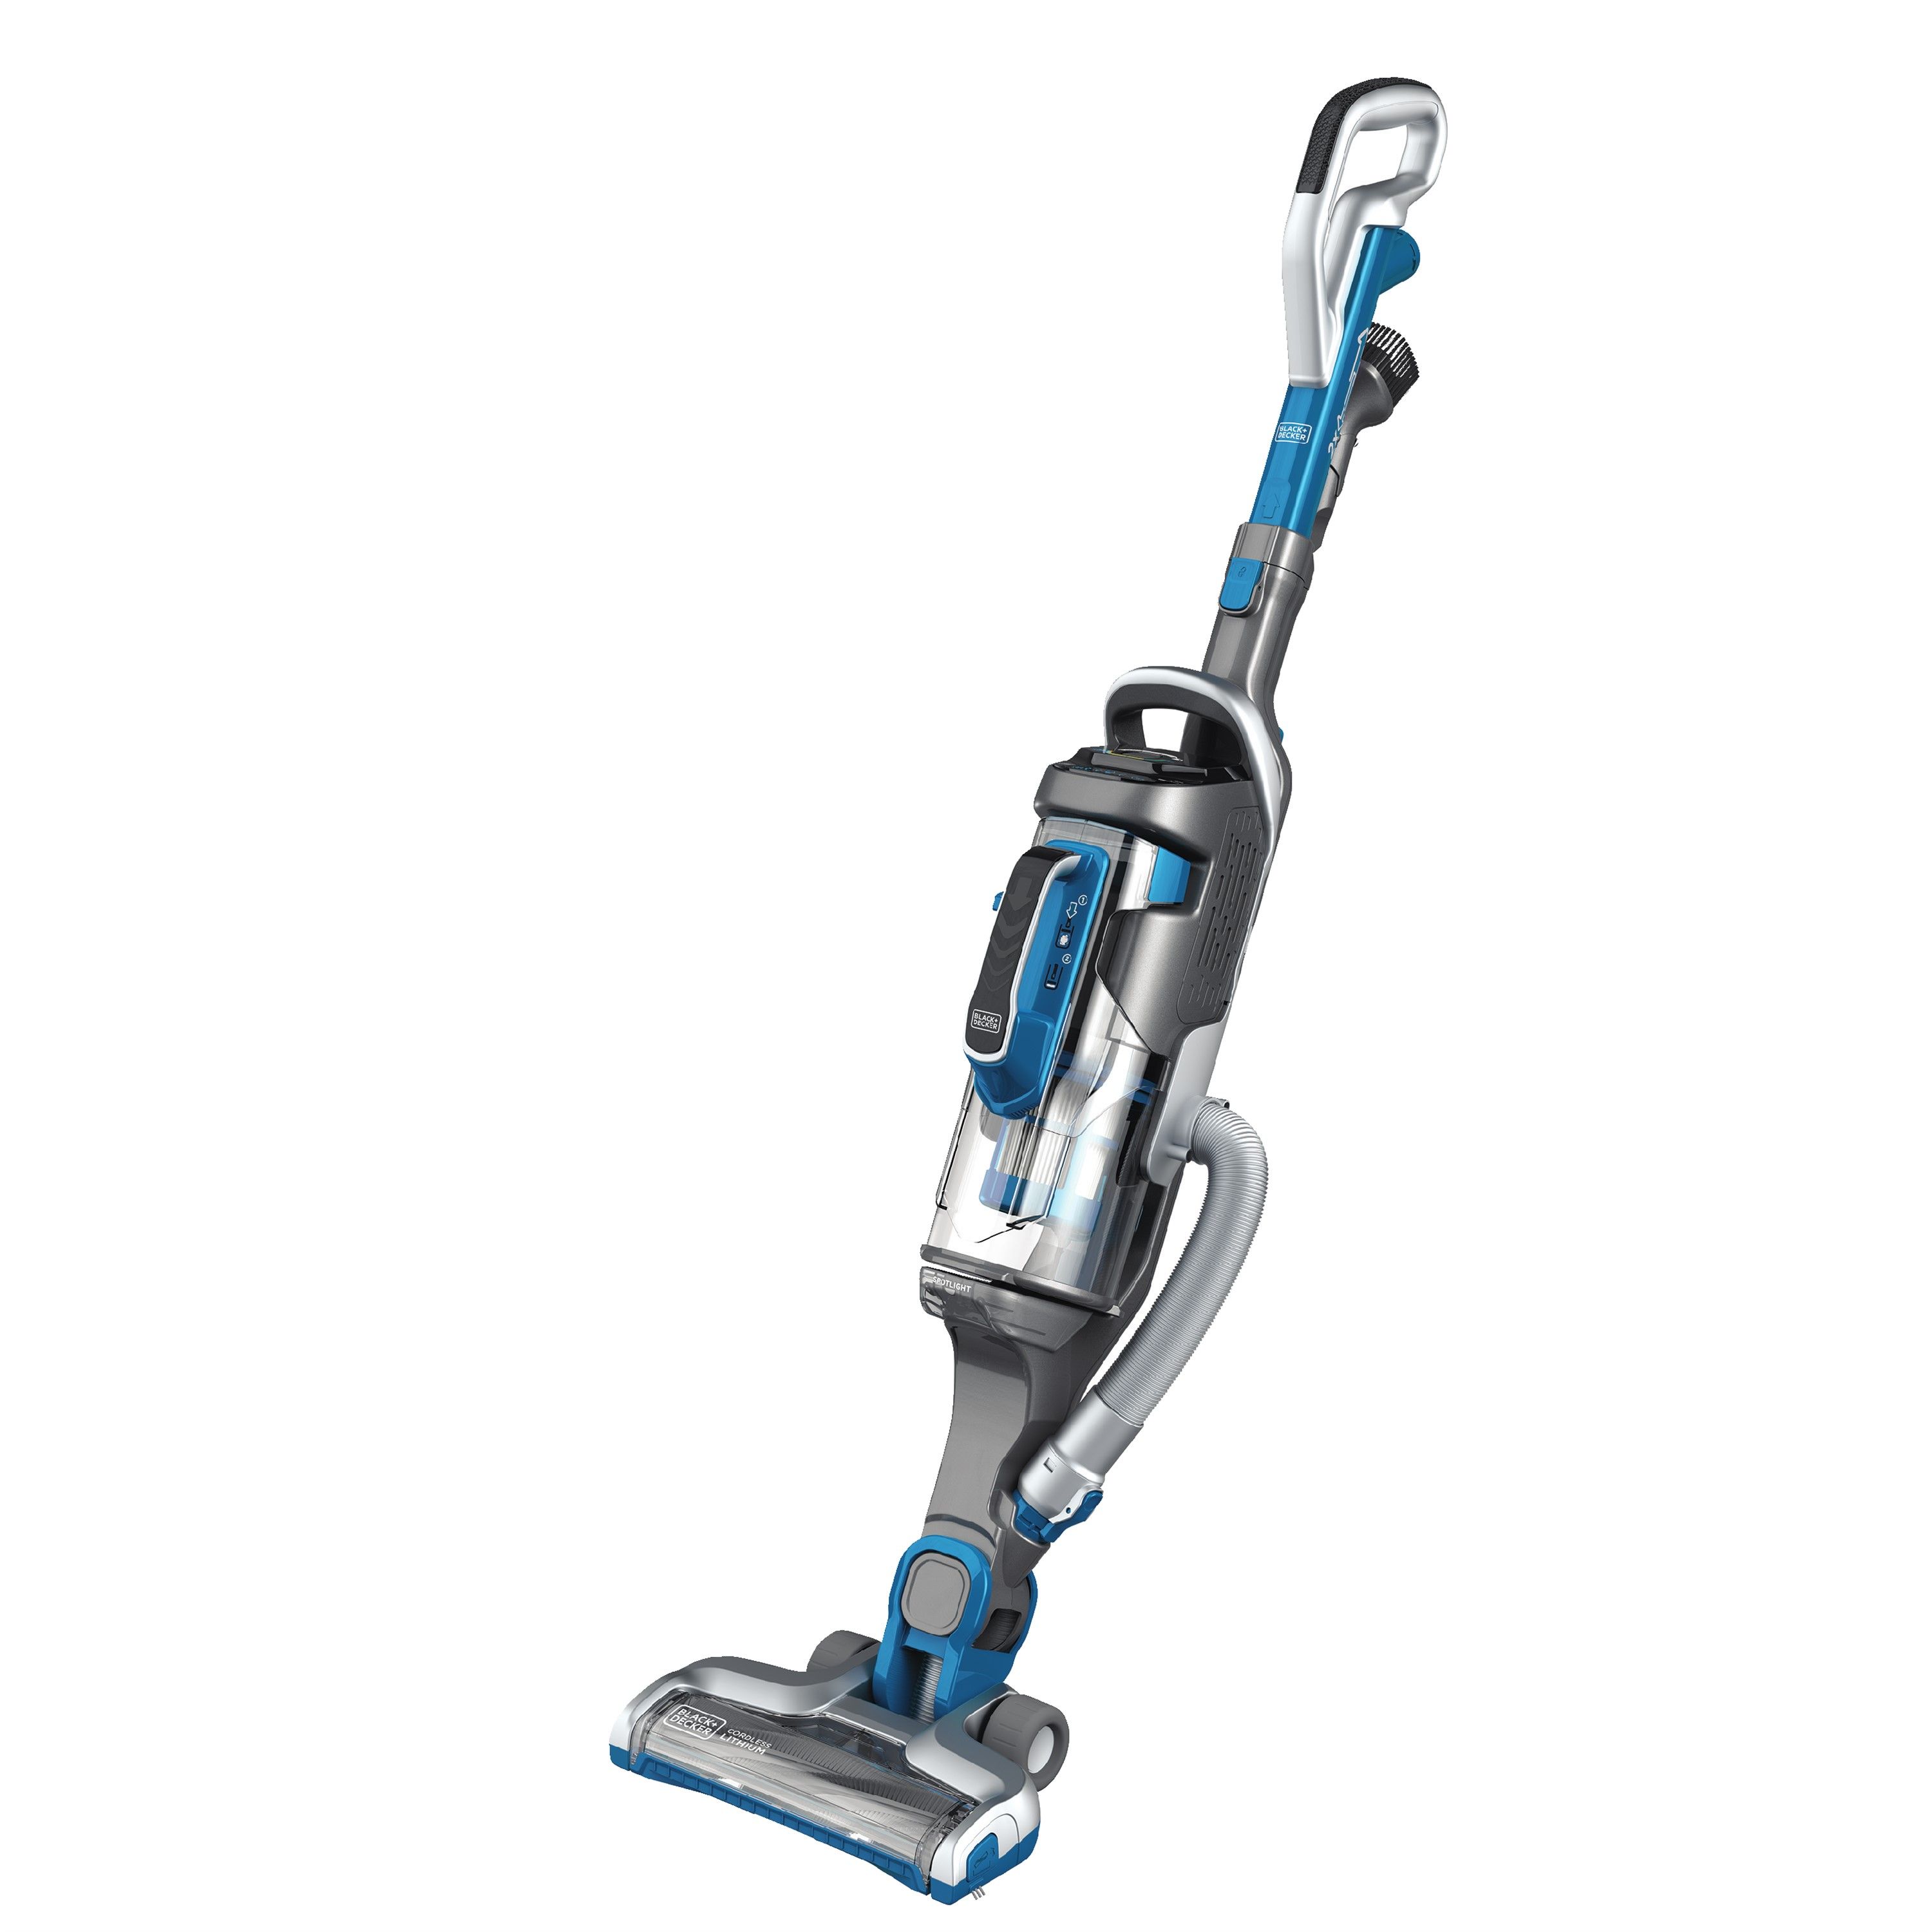 8 Best Vacuums For Hardwood Floors To, Best Small Vacuum For Carpet And Hardwood Floors